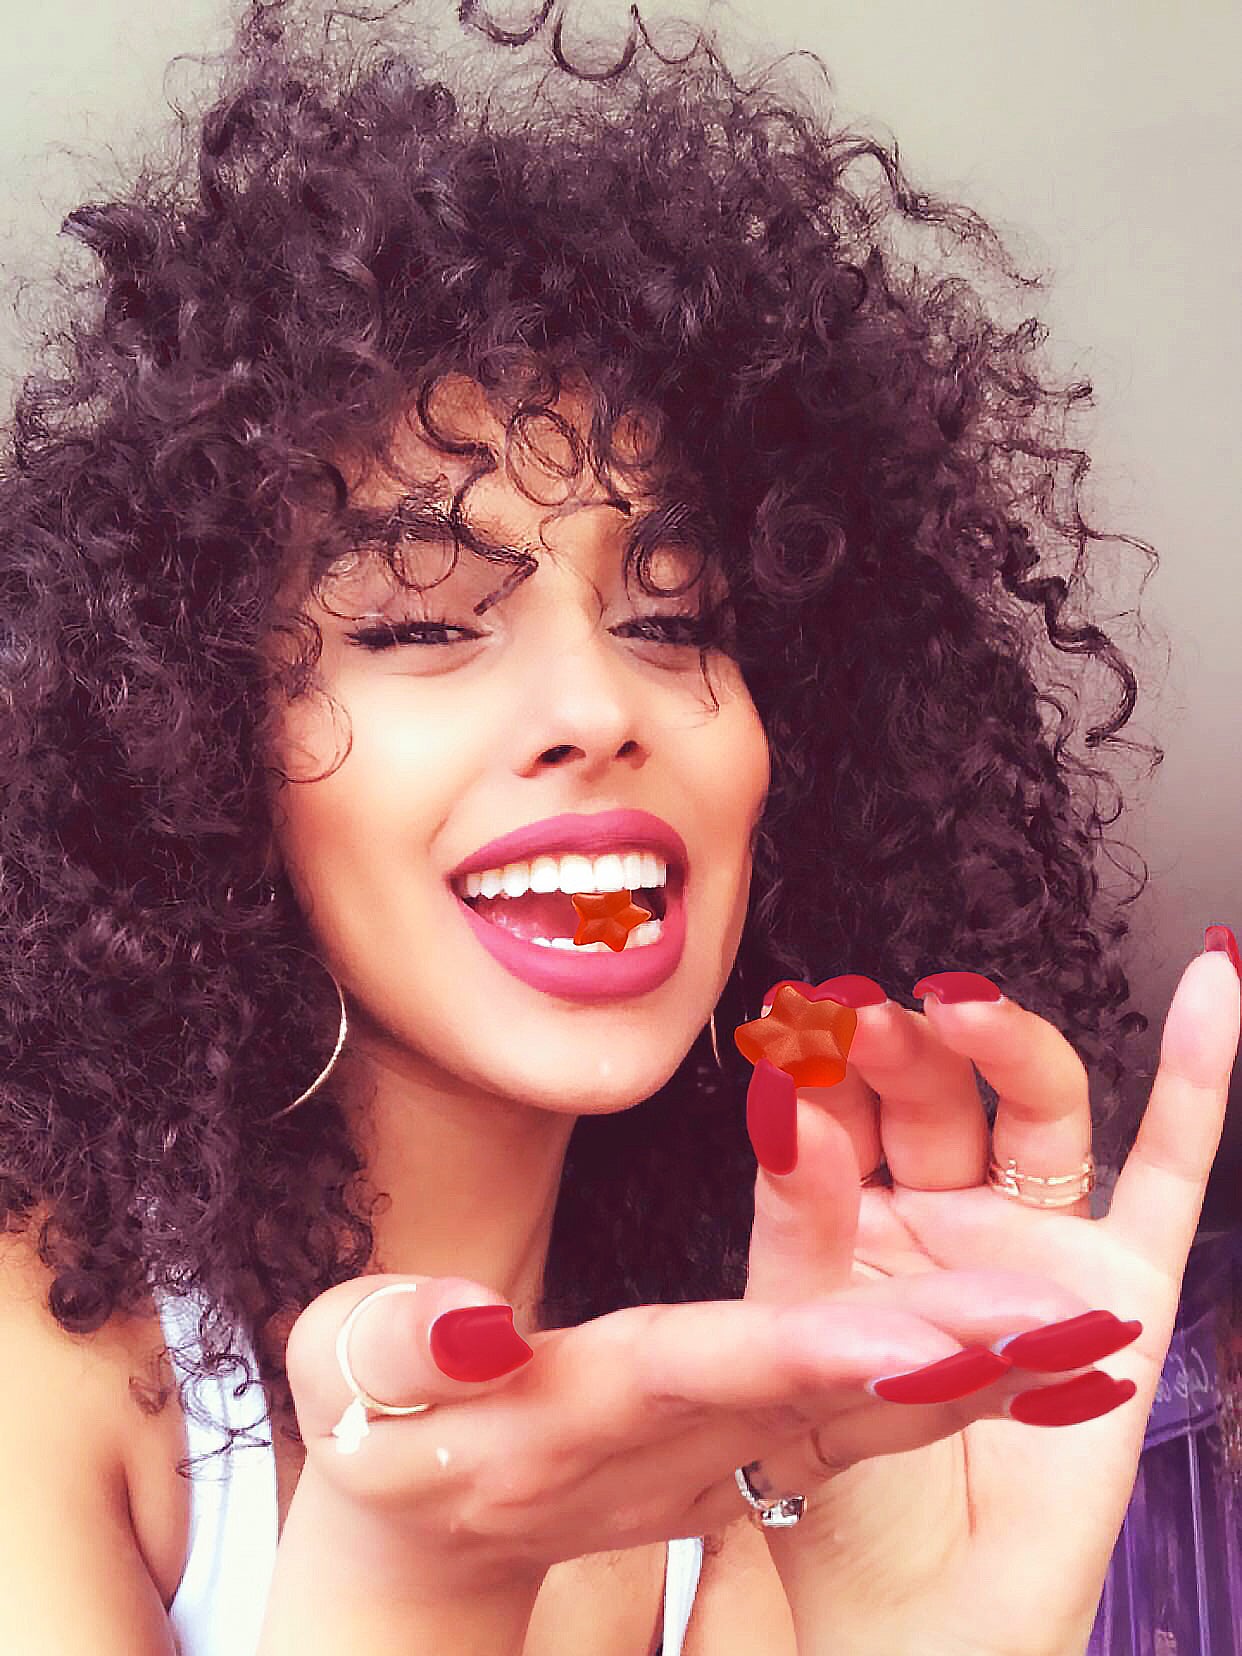 Smiling woman with curly hair eating gummy stars